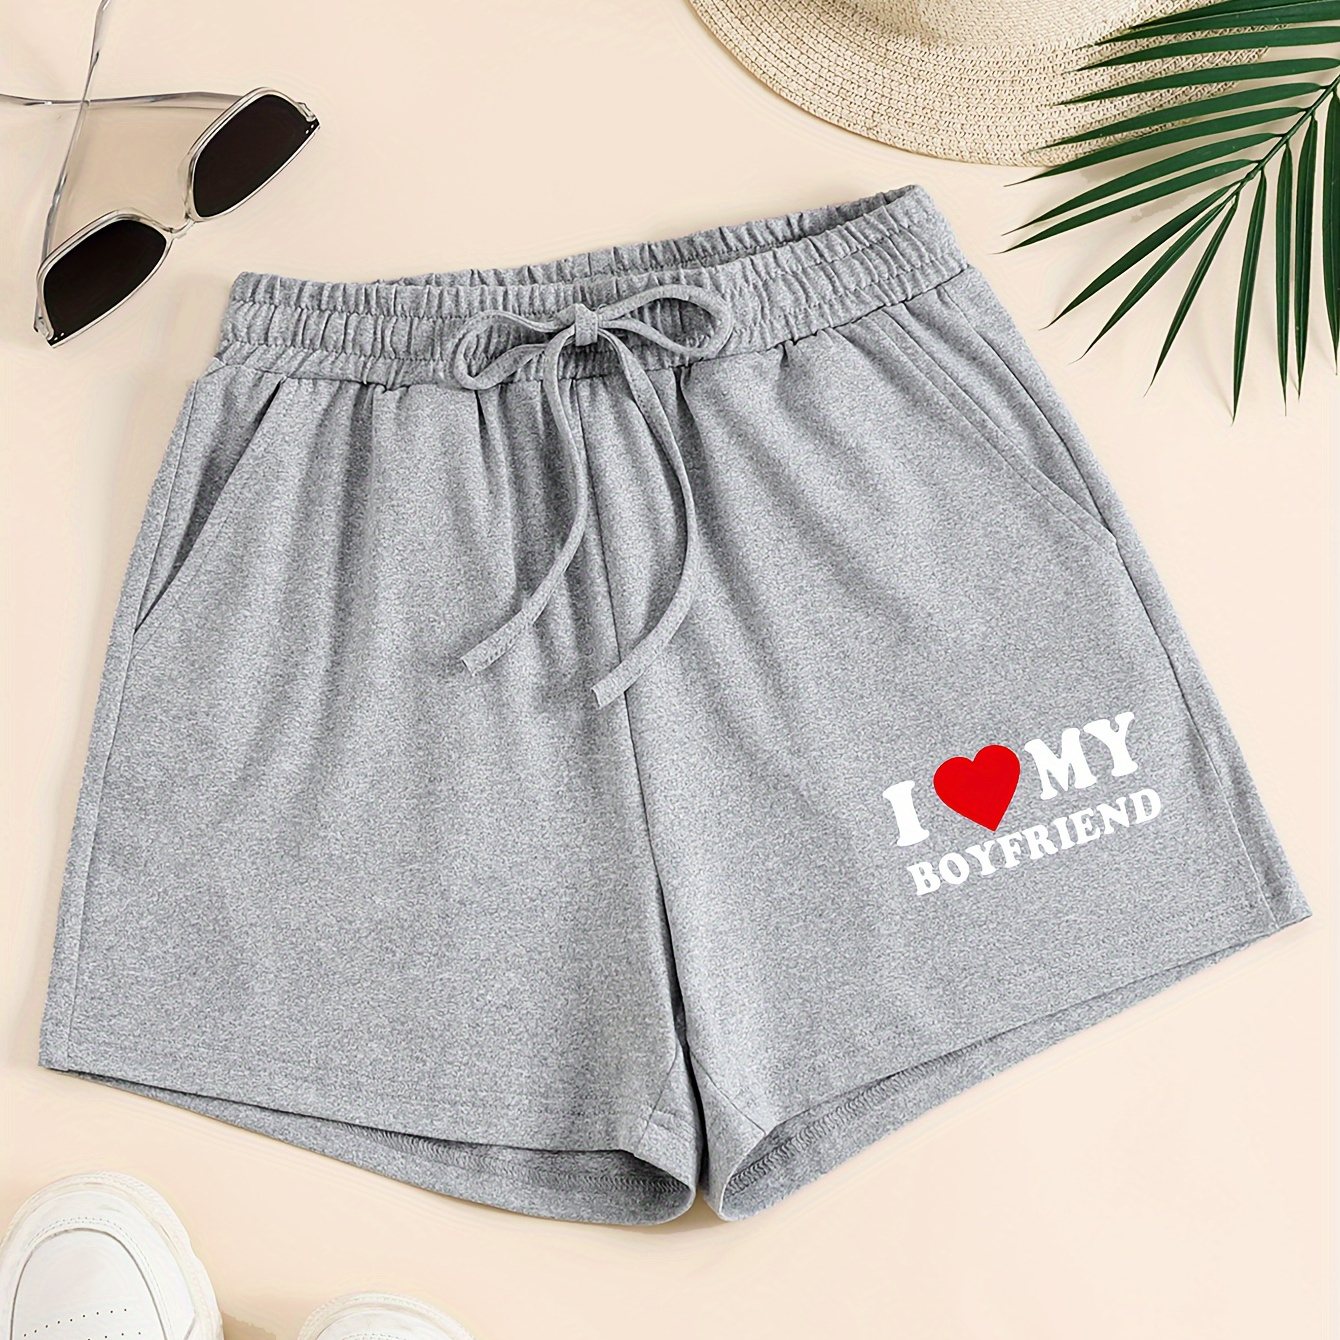 

I Love My Boyfriend Print Shorts With Pockets, Casual Drawstring Waist Shorts For Spring & Summer, Women's Clothing